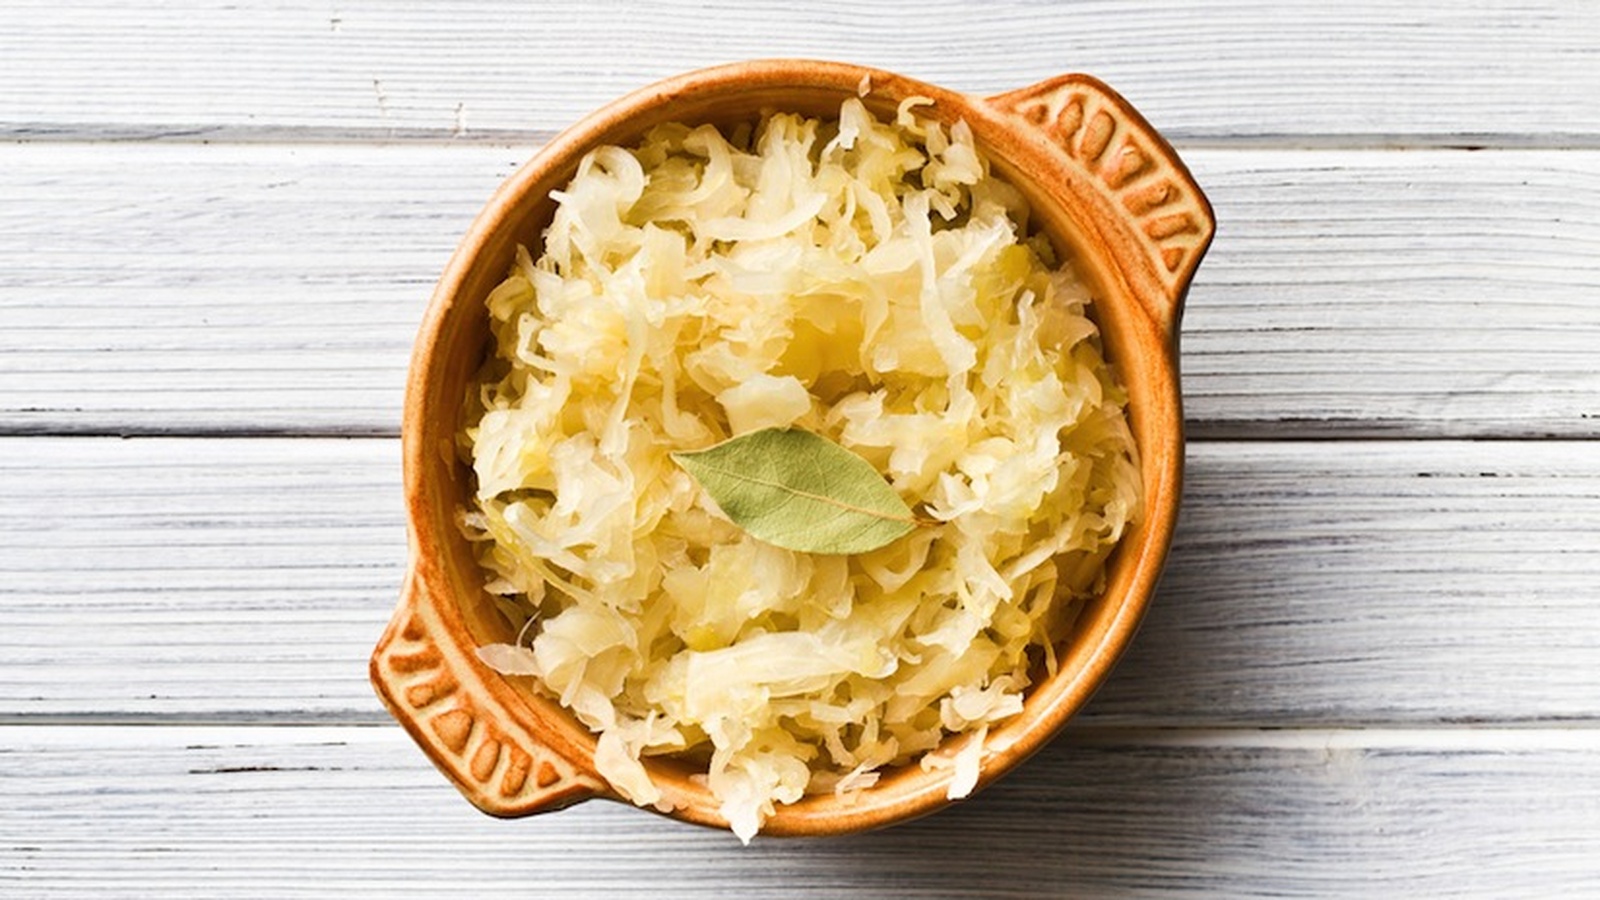 Sauerkraut And The Importance Of Good Bacteria